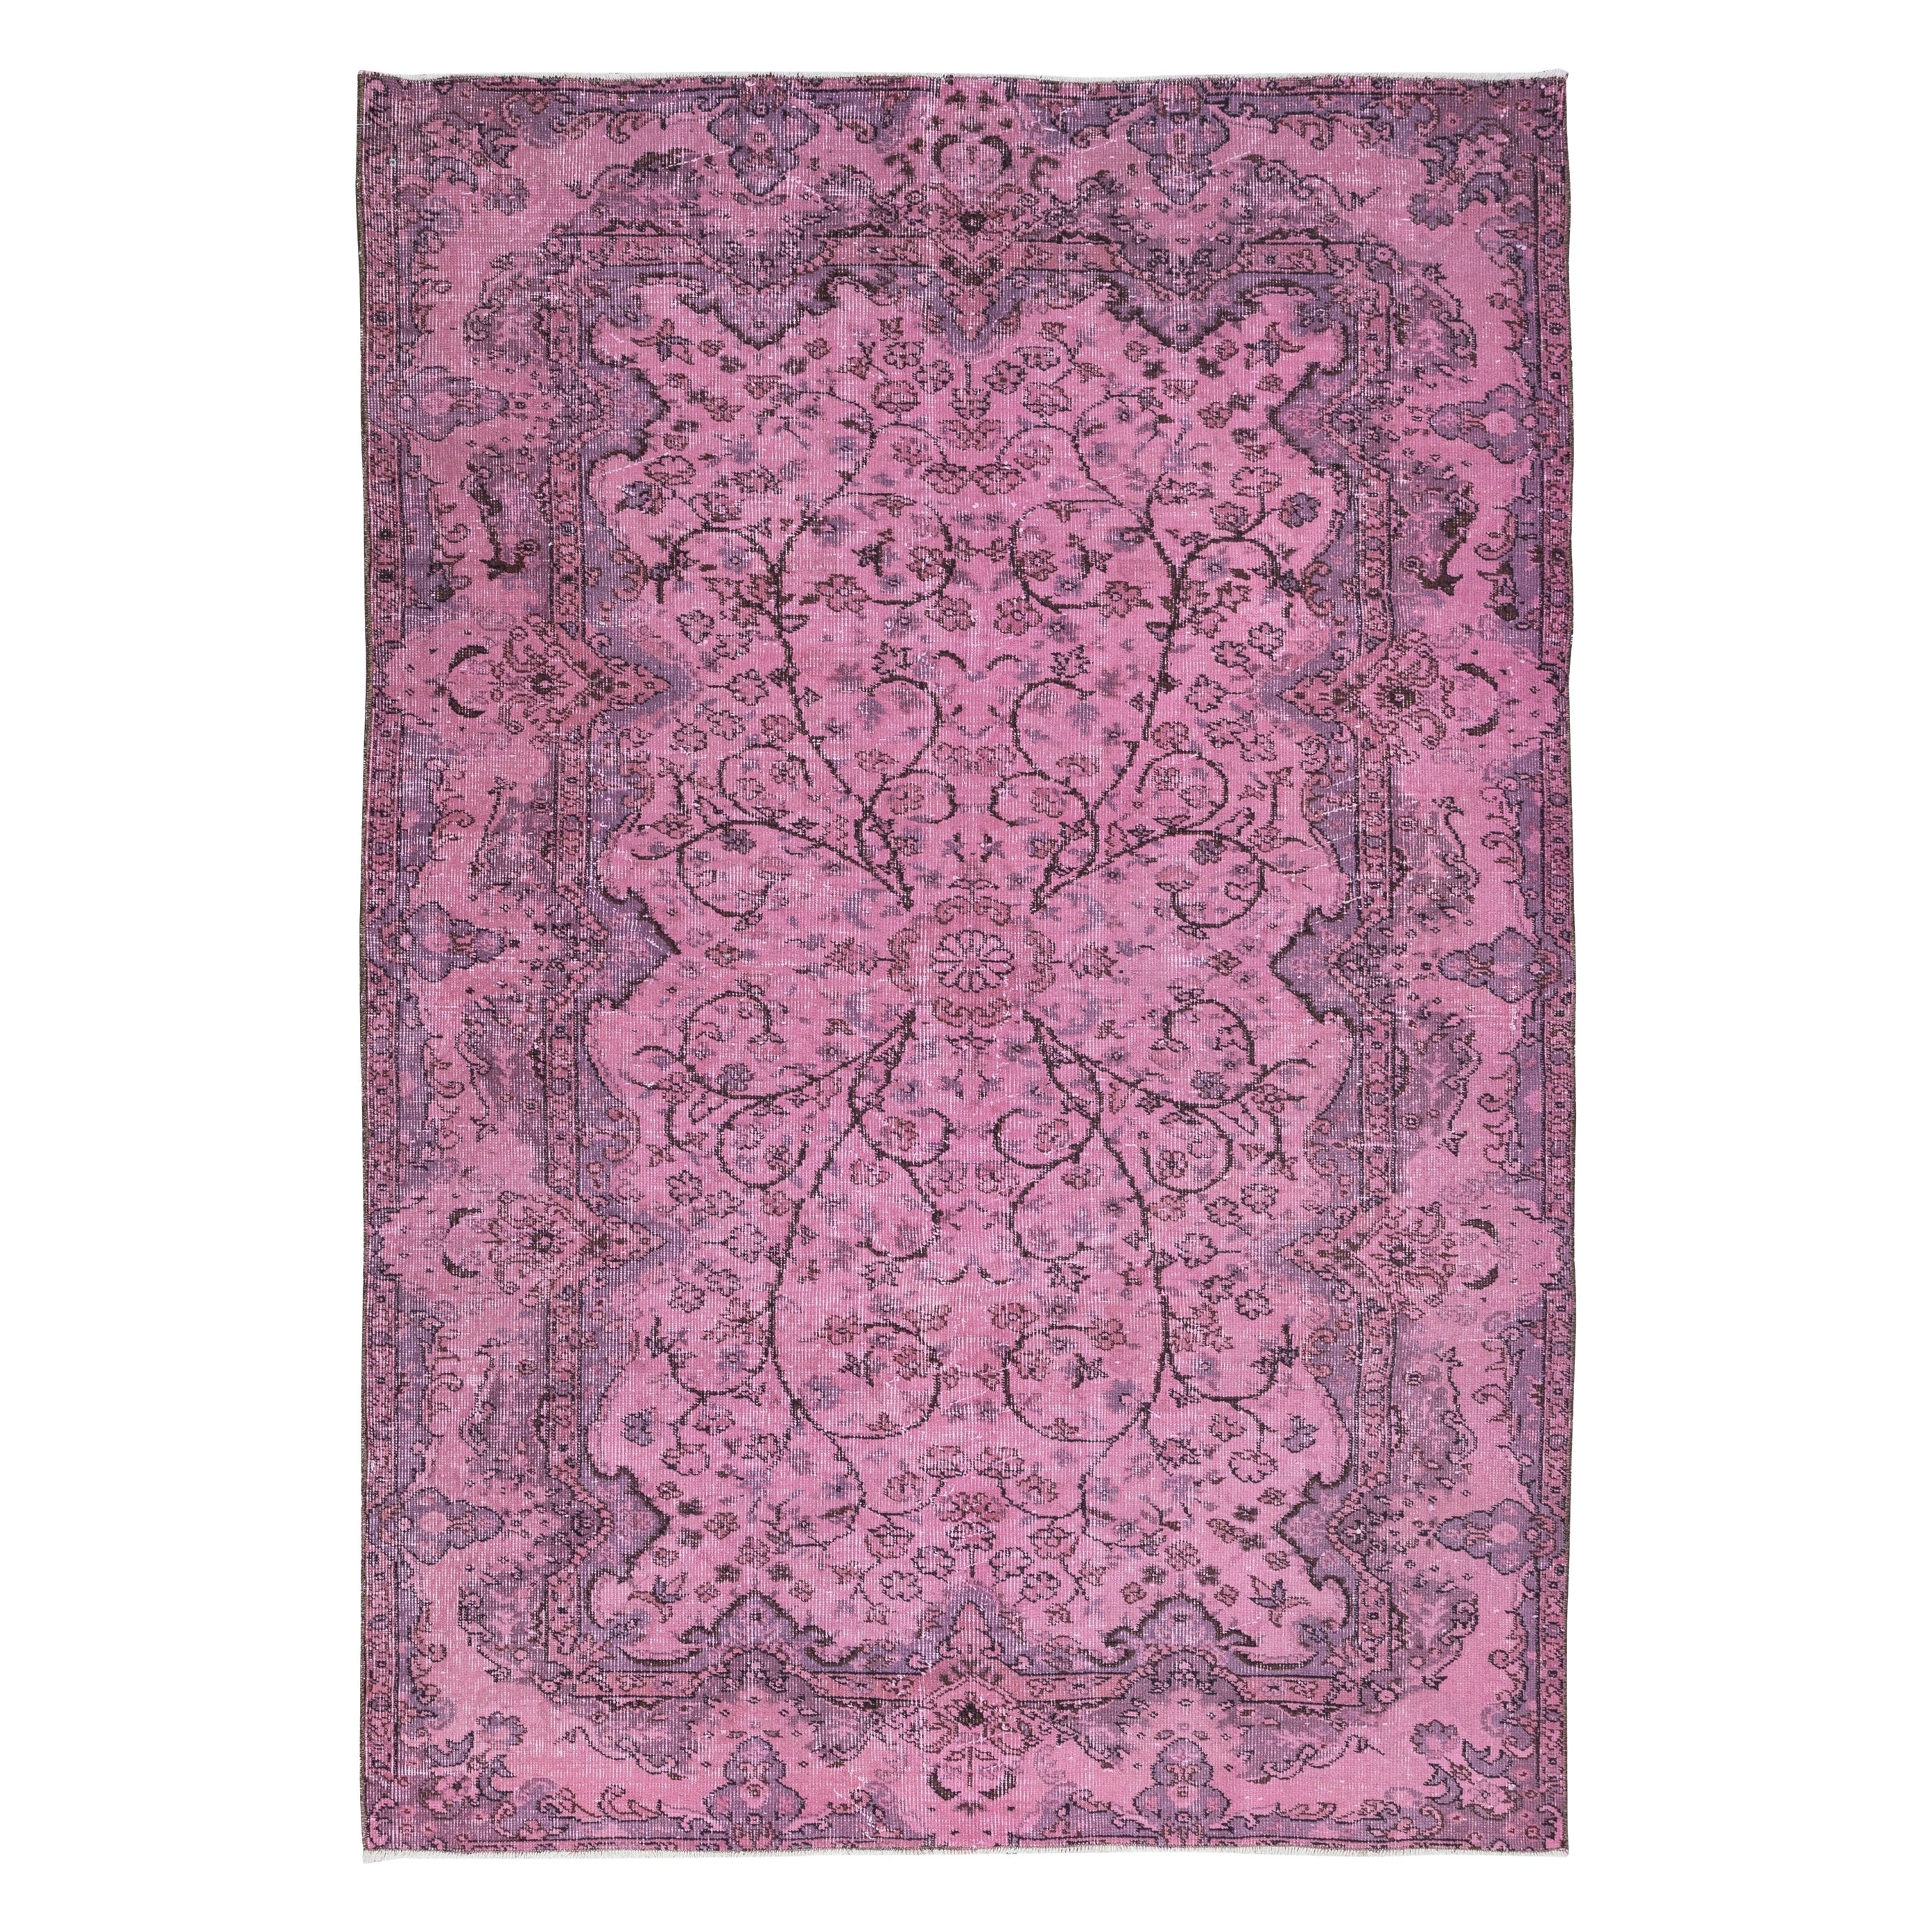 5.4x7.7 Ft Magnificent Handmade Pink Rug, Contemporary Turkish Wool Carpet